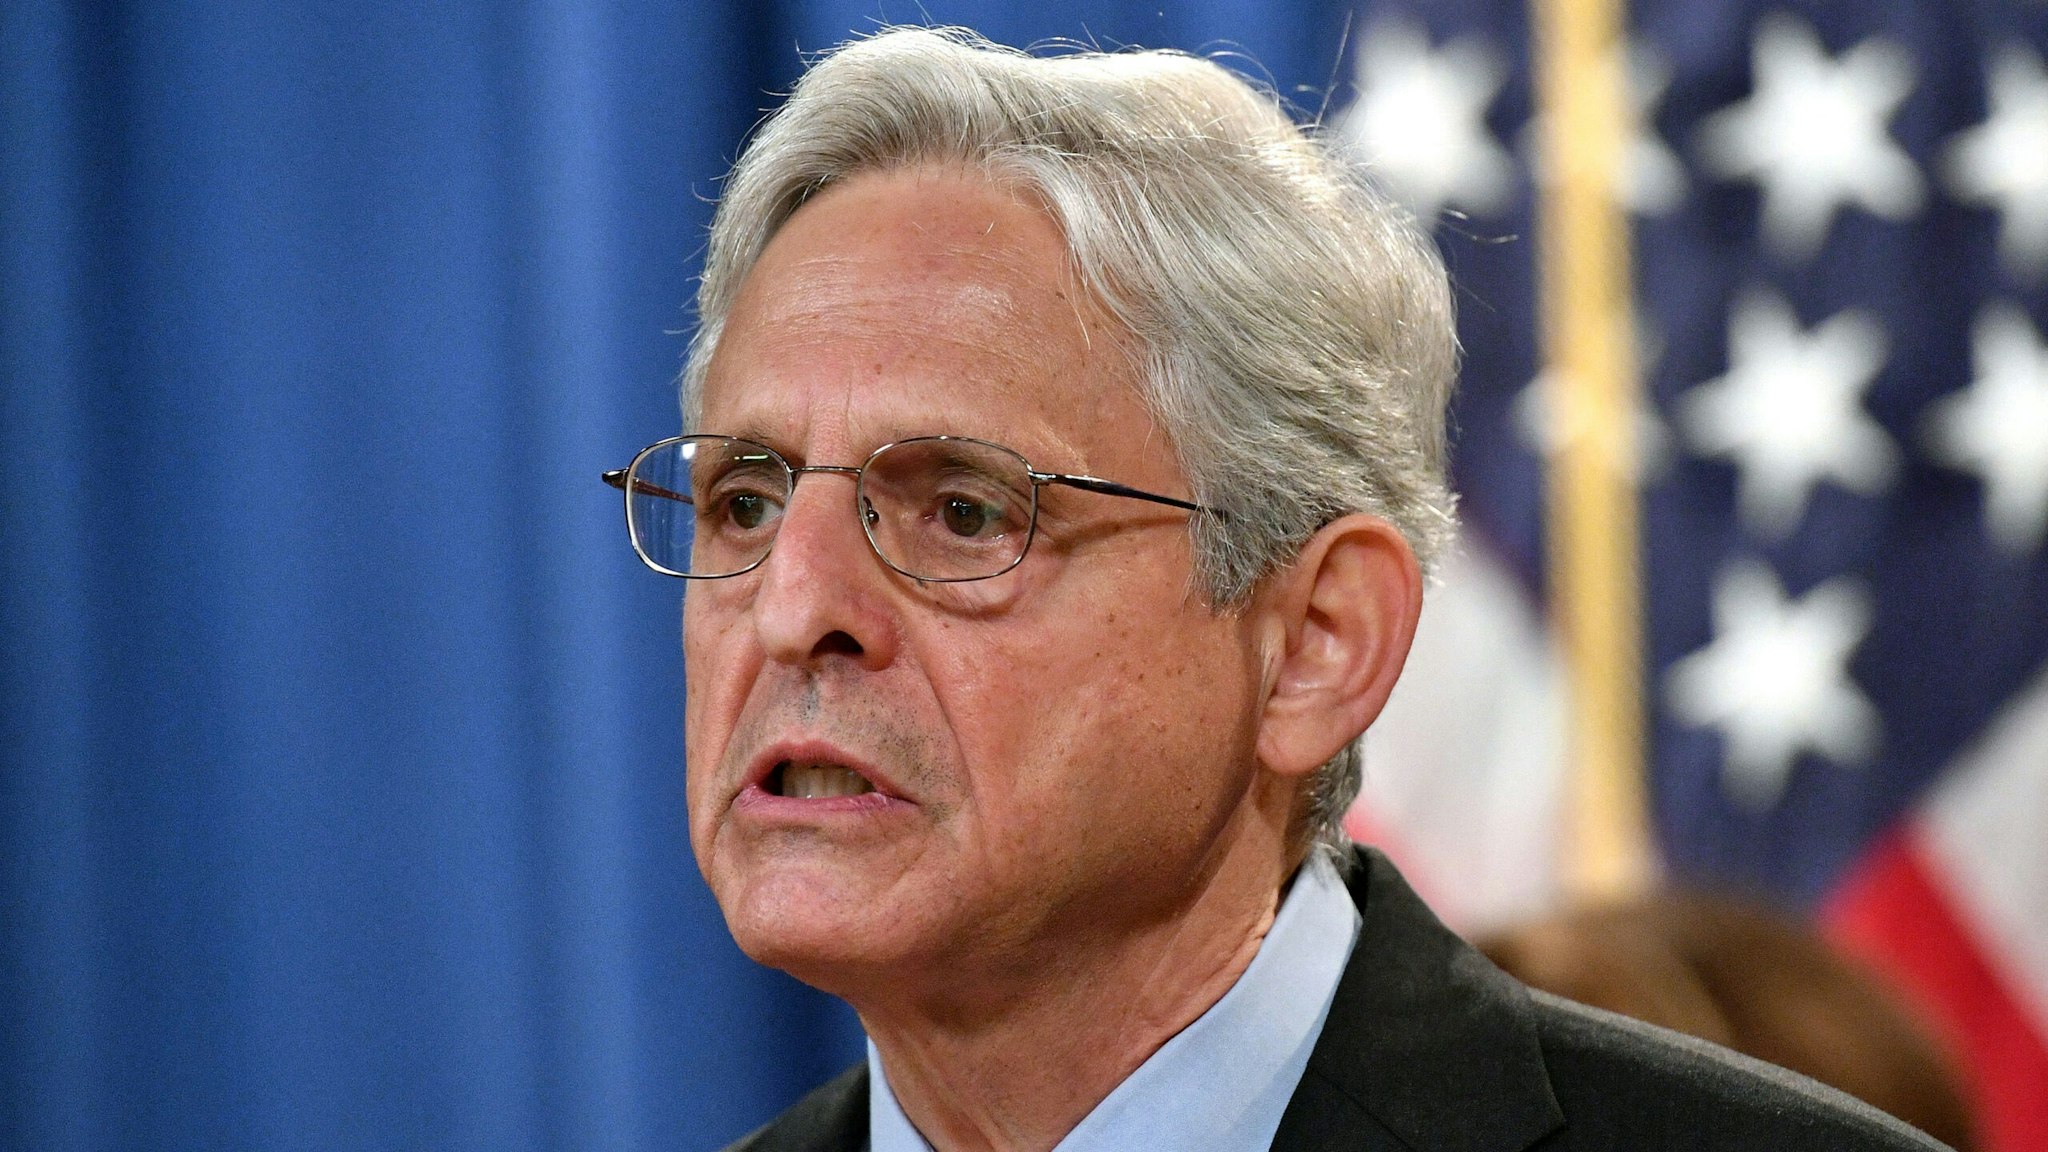 US Attorney General Merrick Garland holds a press conference to announce a lawsuit against Texas at the Department of Justice in Washington, DC on September 9, 2021 - The US Justice Department filed suit against the state of Texas on Thursday over its new law that bans abortions after six weeks of pregnancy.